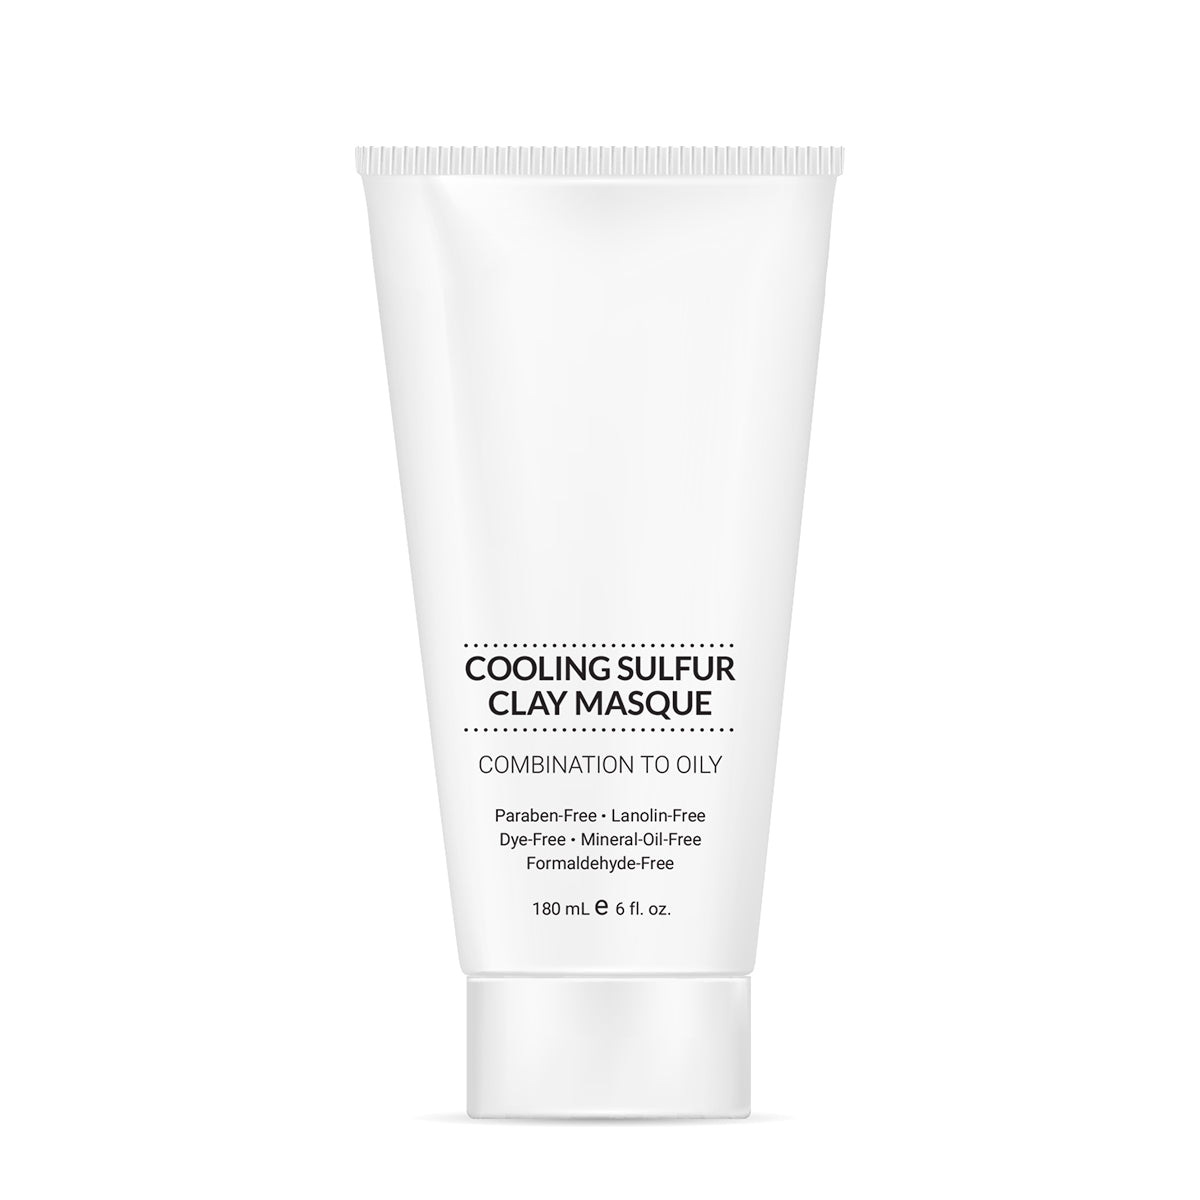 Cooling Sulfur Clay Masque